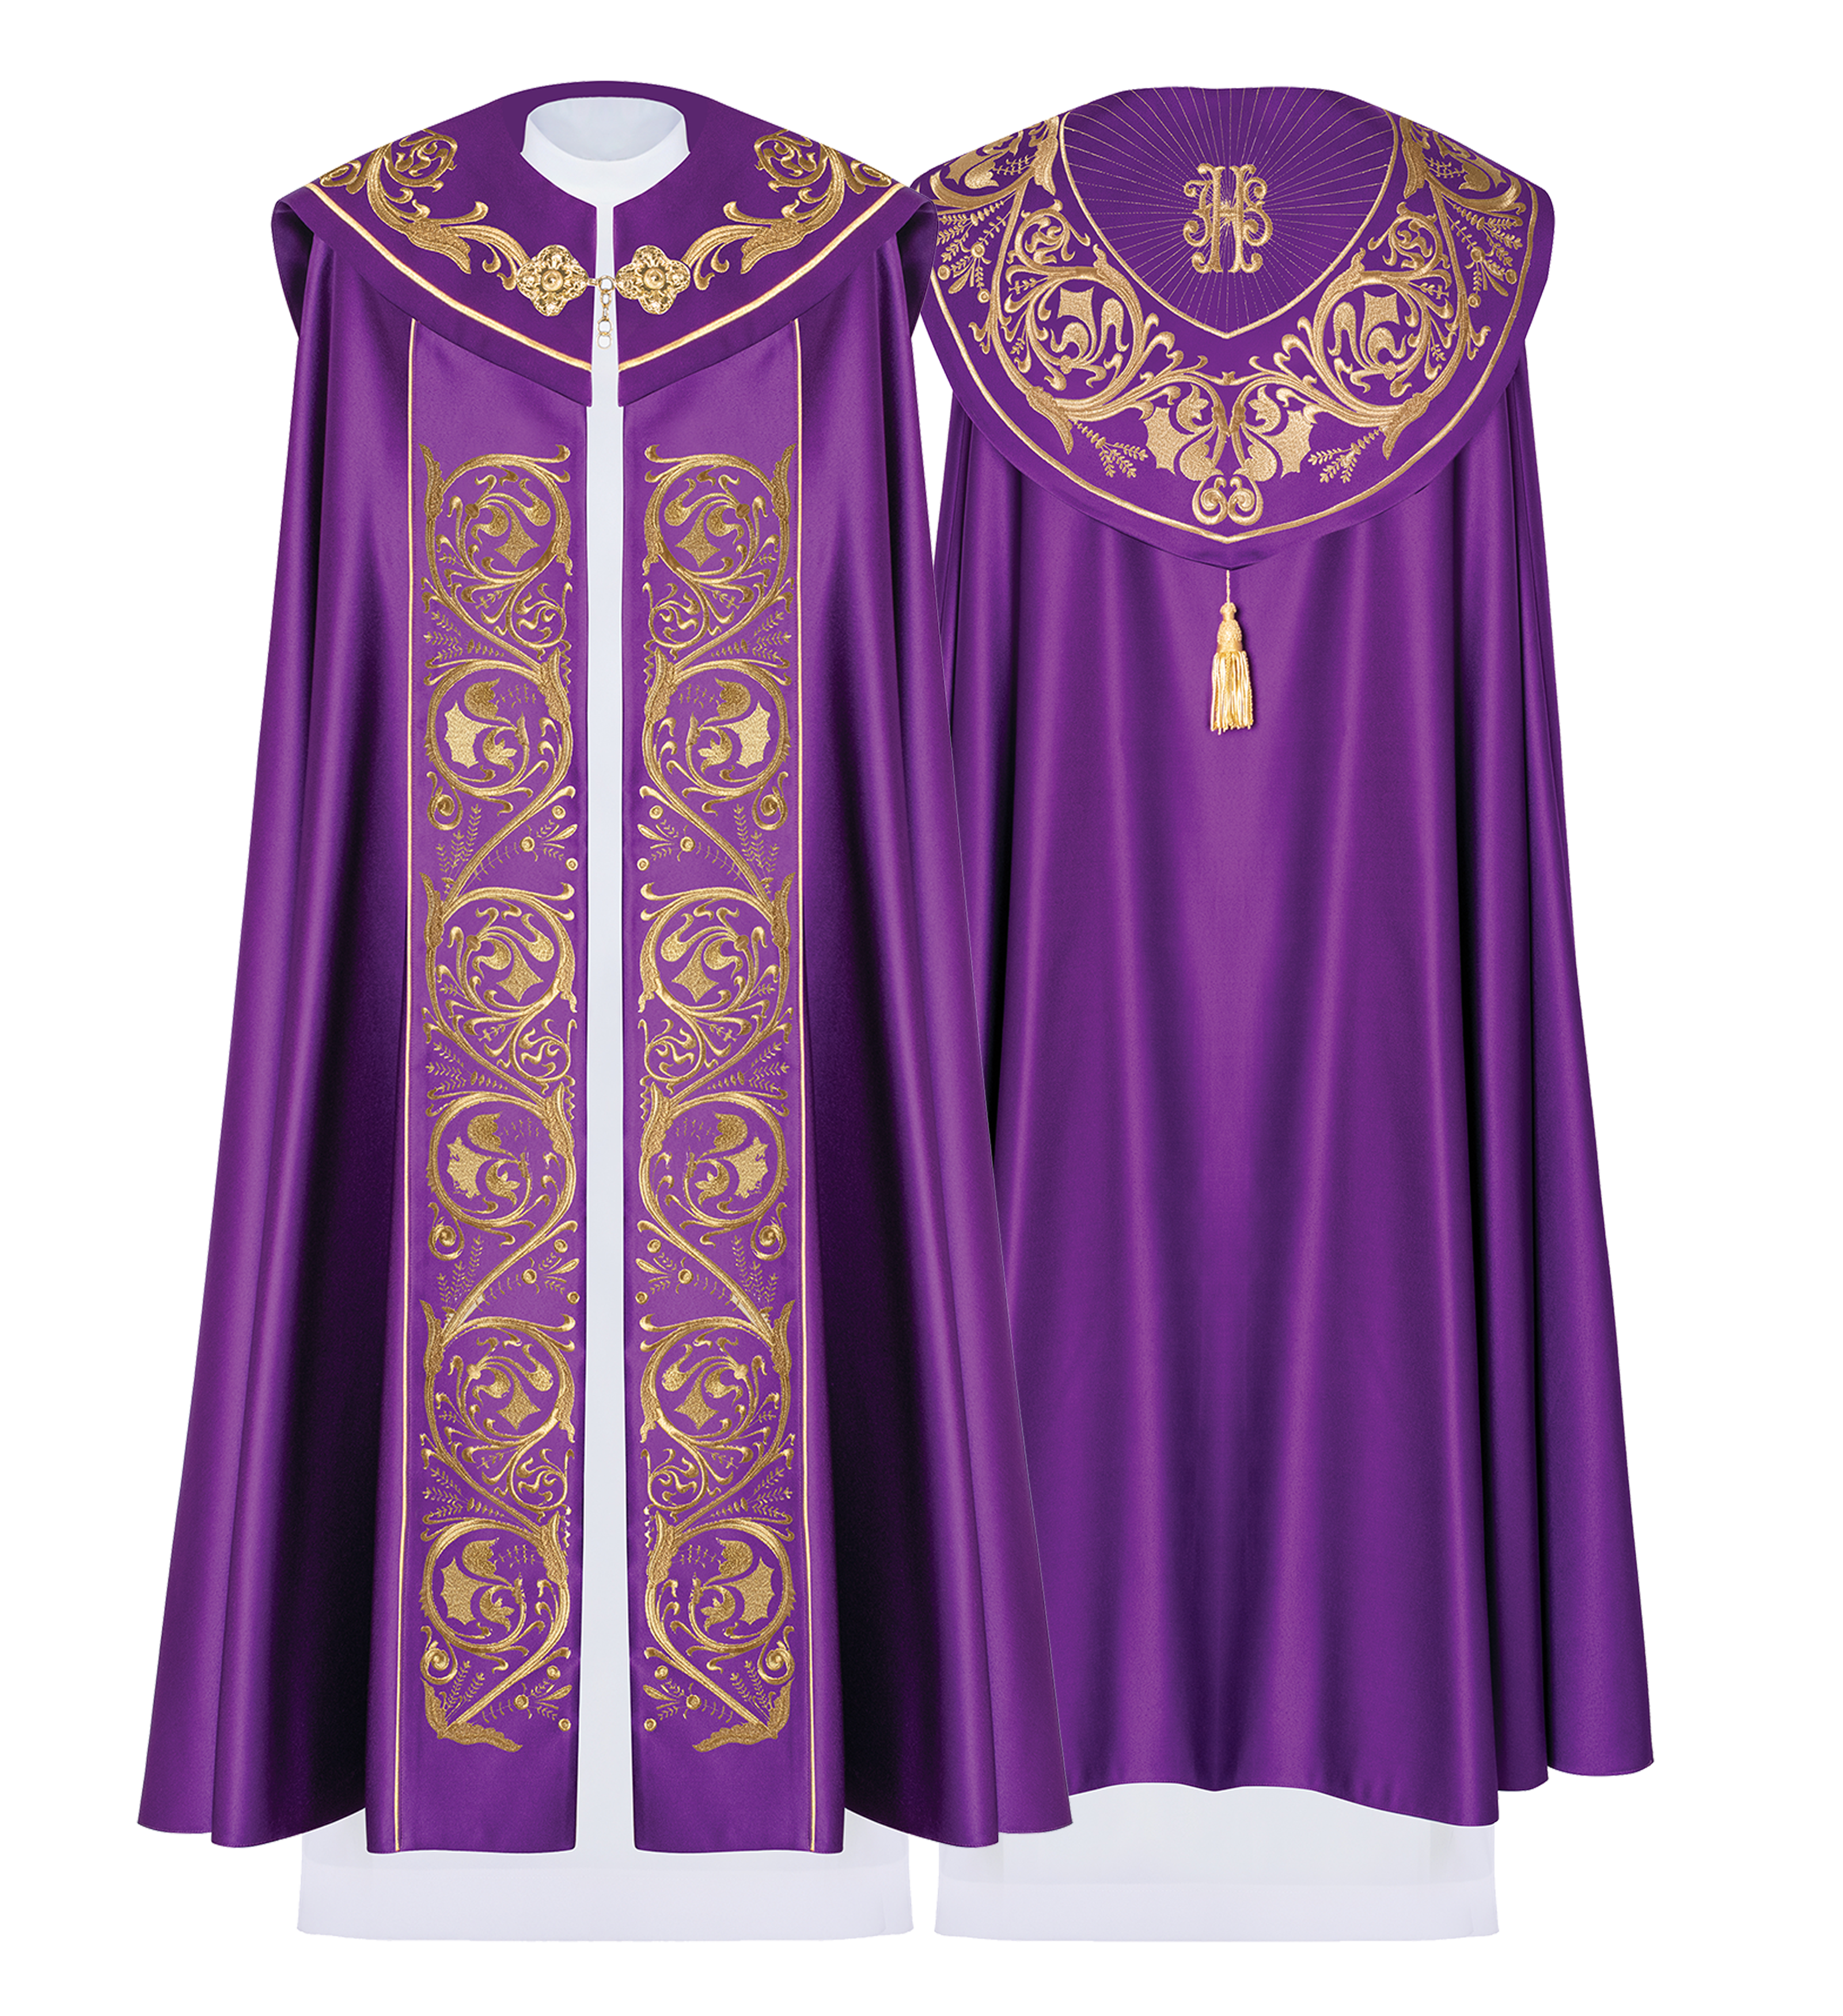 Purple liturgical cape with gold IHS monogram